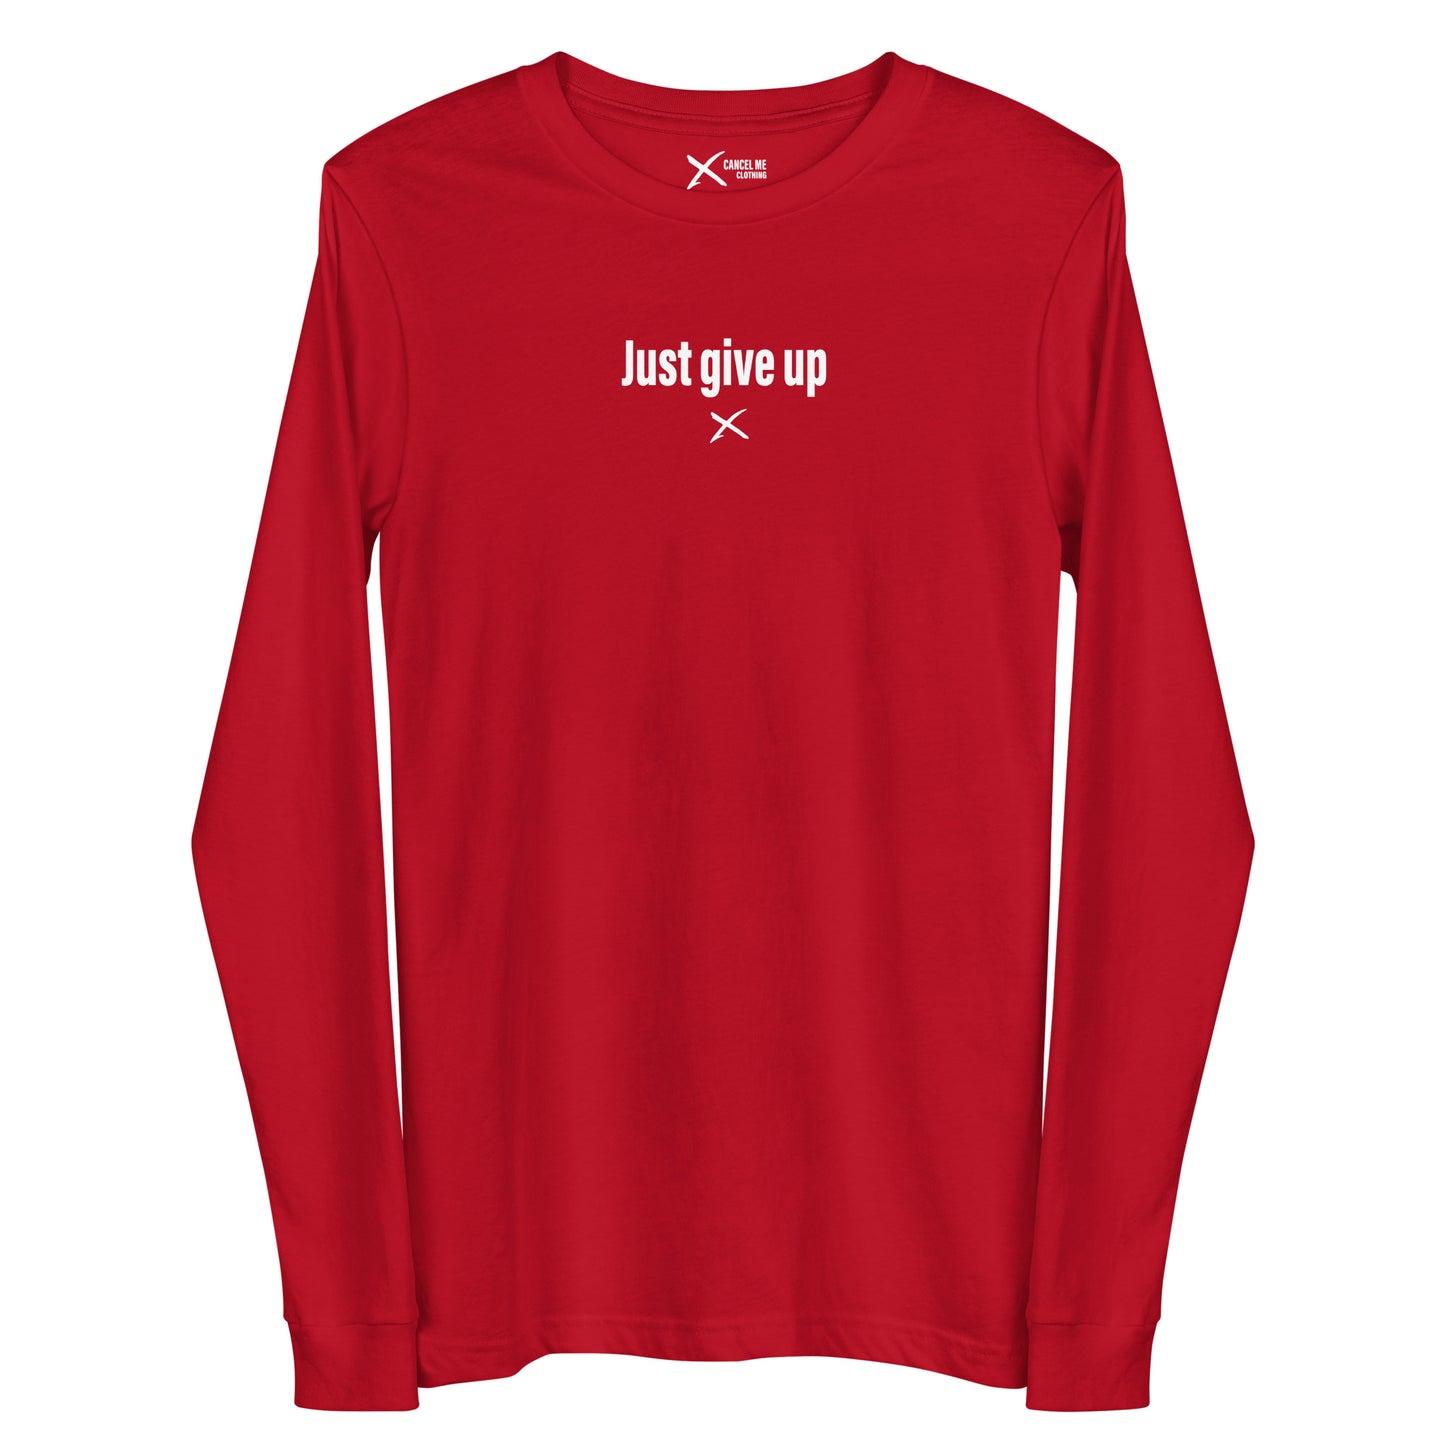 Just give up - Longsleeve